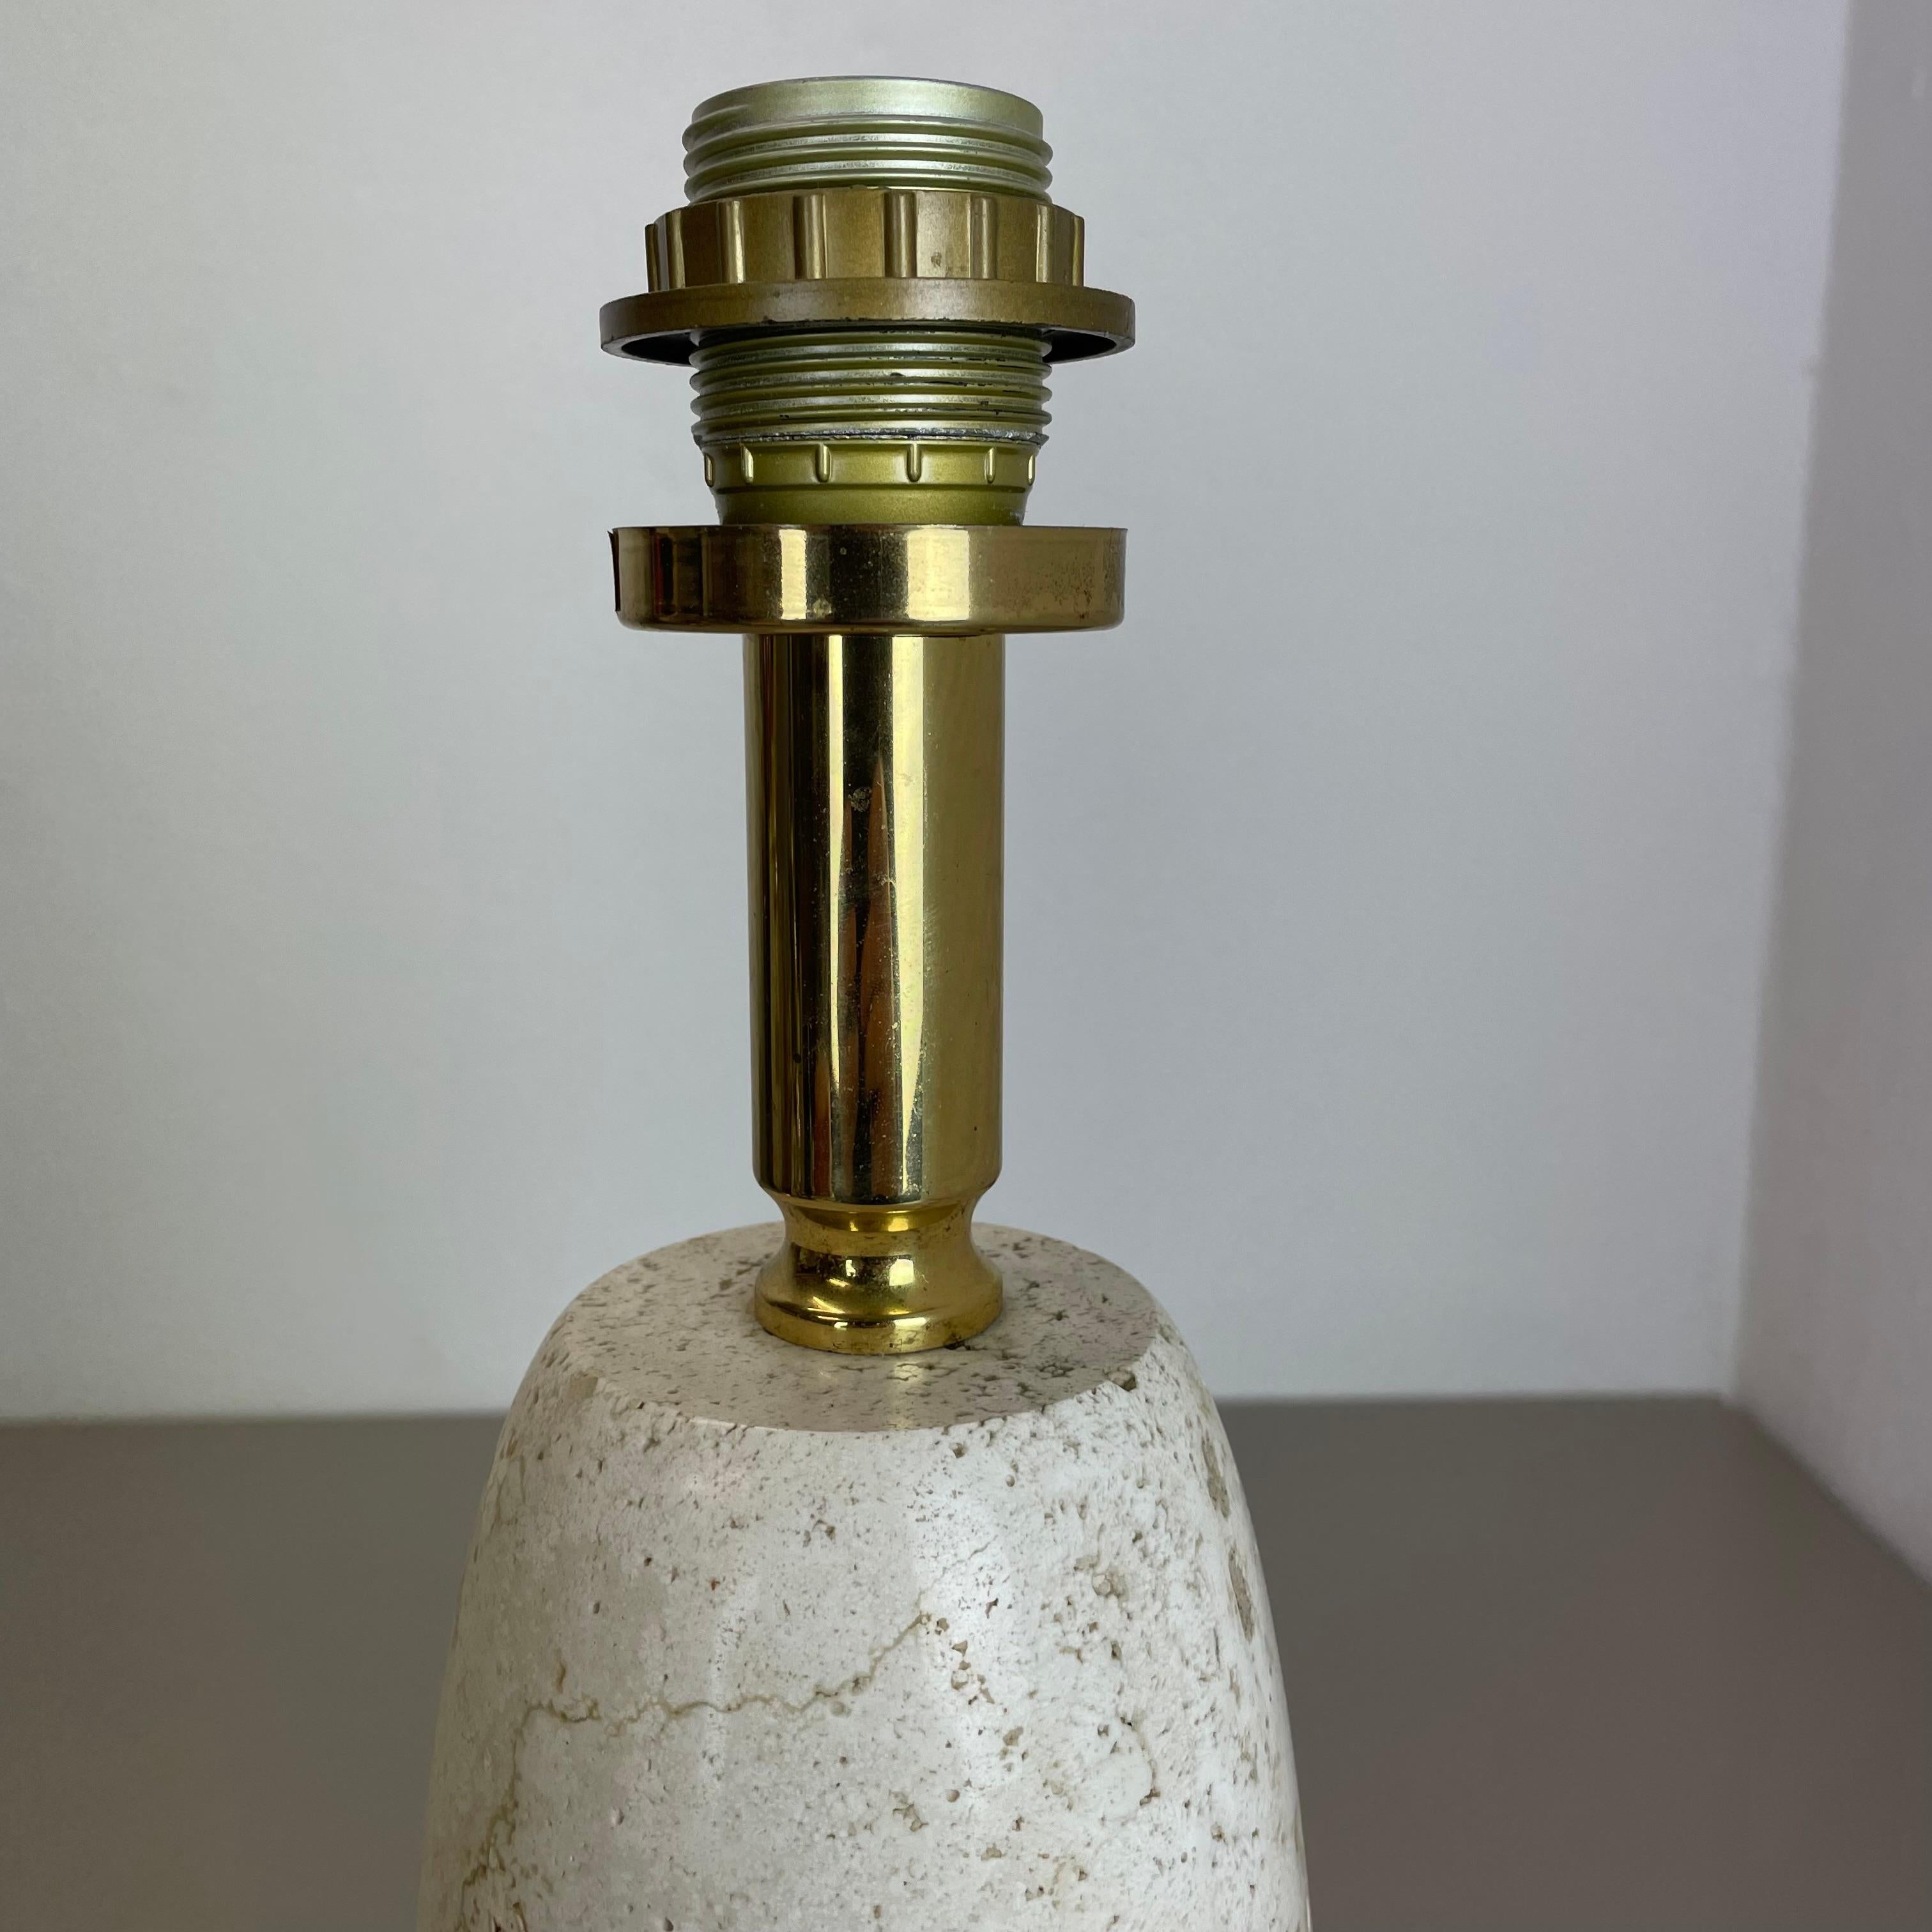 6.4kg Travertine Marble Fratelli Mannelli Style Table Light Base, Italy, 1970s For Sale 5